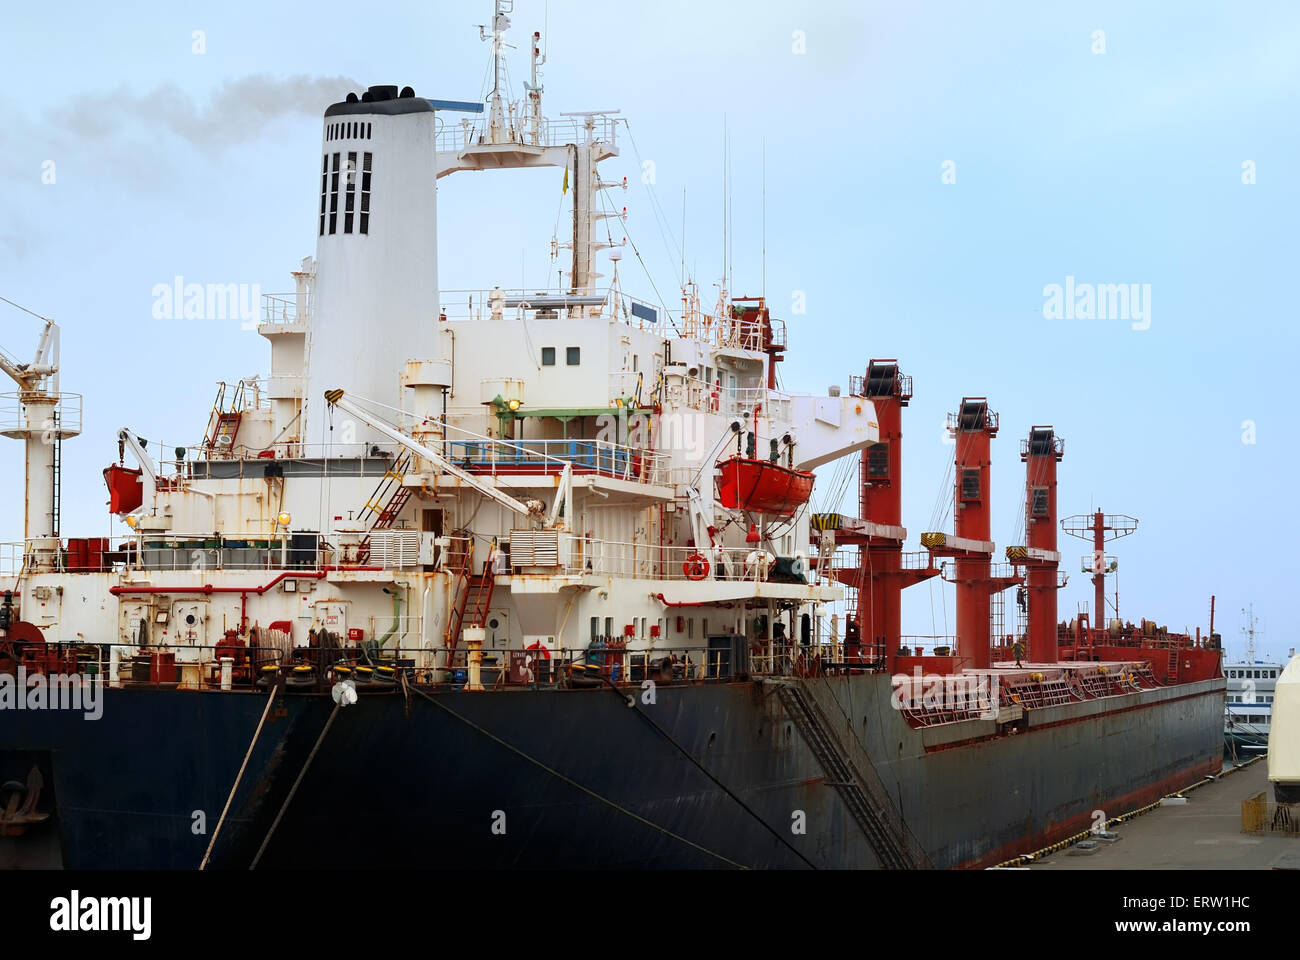 The commercial vessel is moored in port Stock Photo